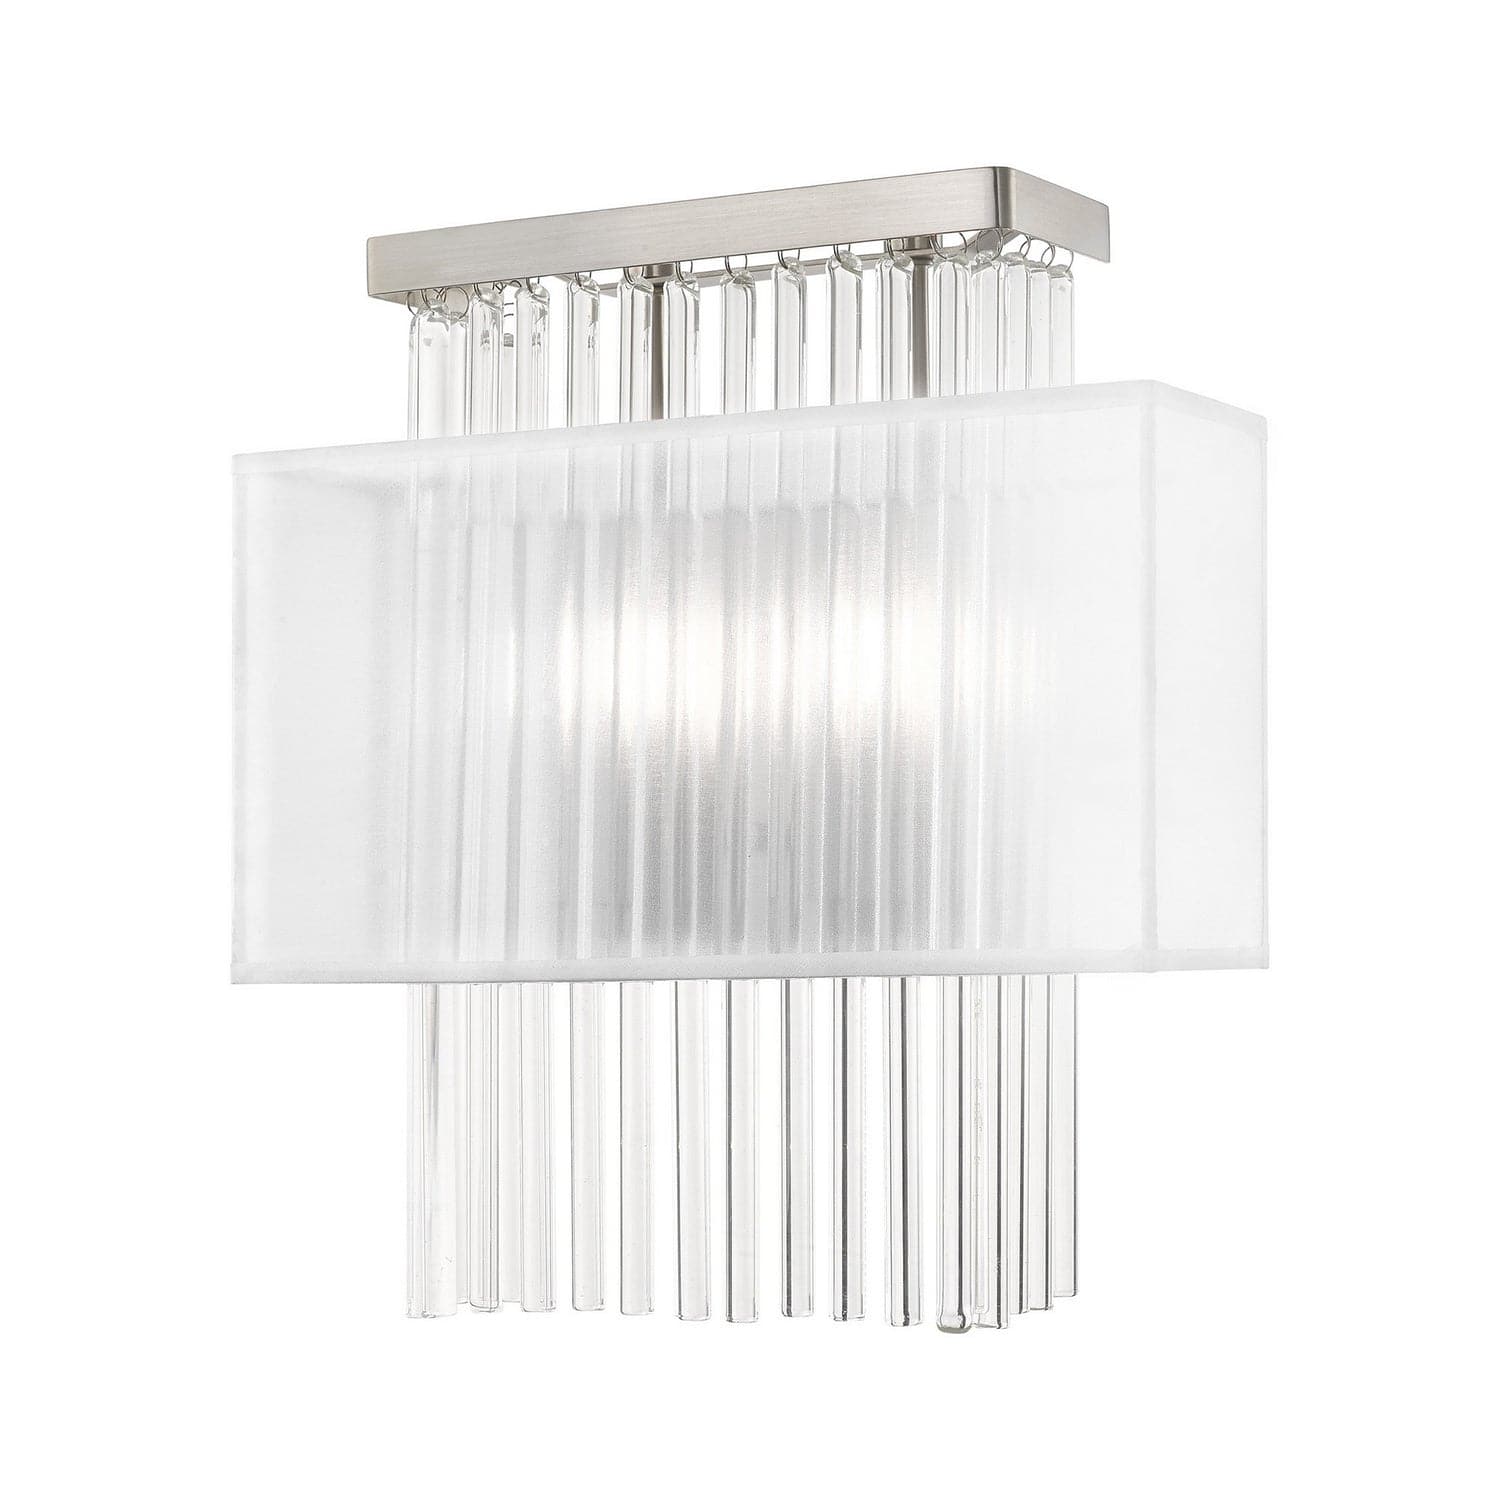 Livex Lighting - 41148-91 - Two Light Wall Sconce - Alexis - Brushed Nickel